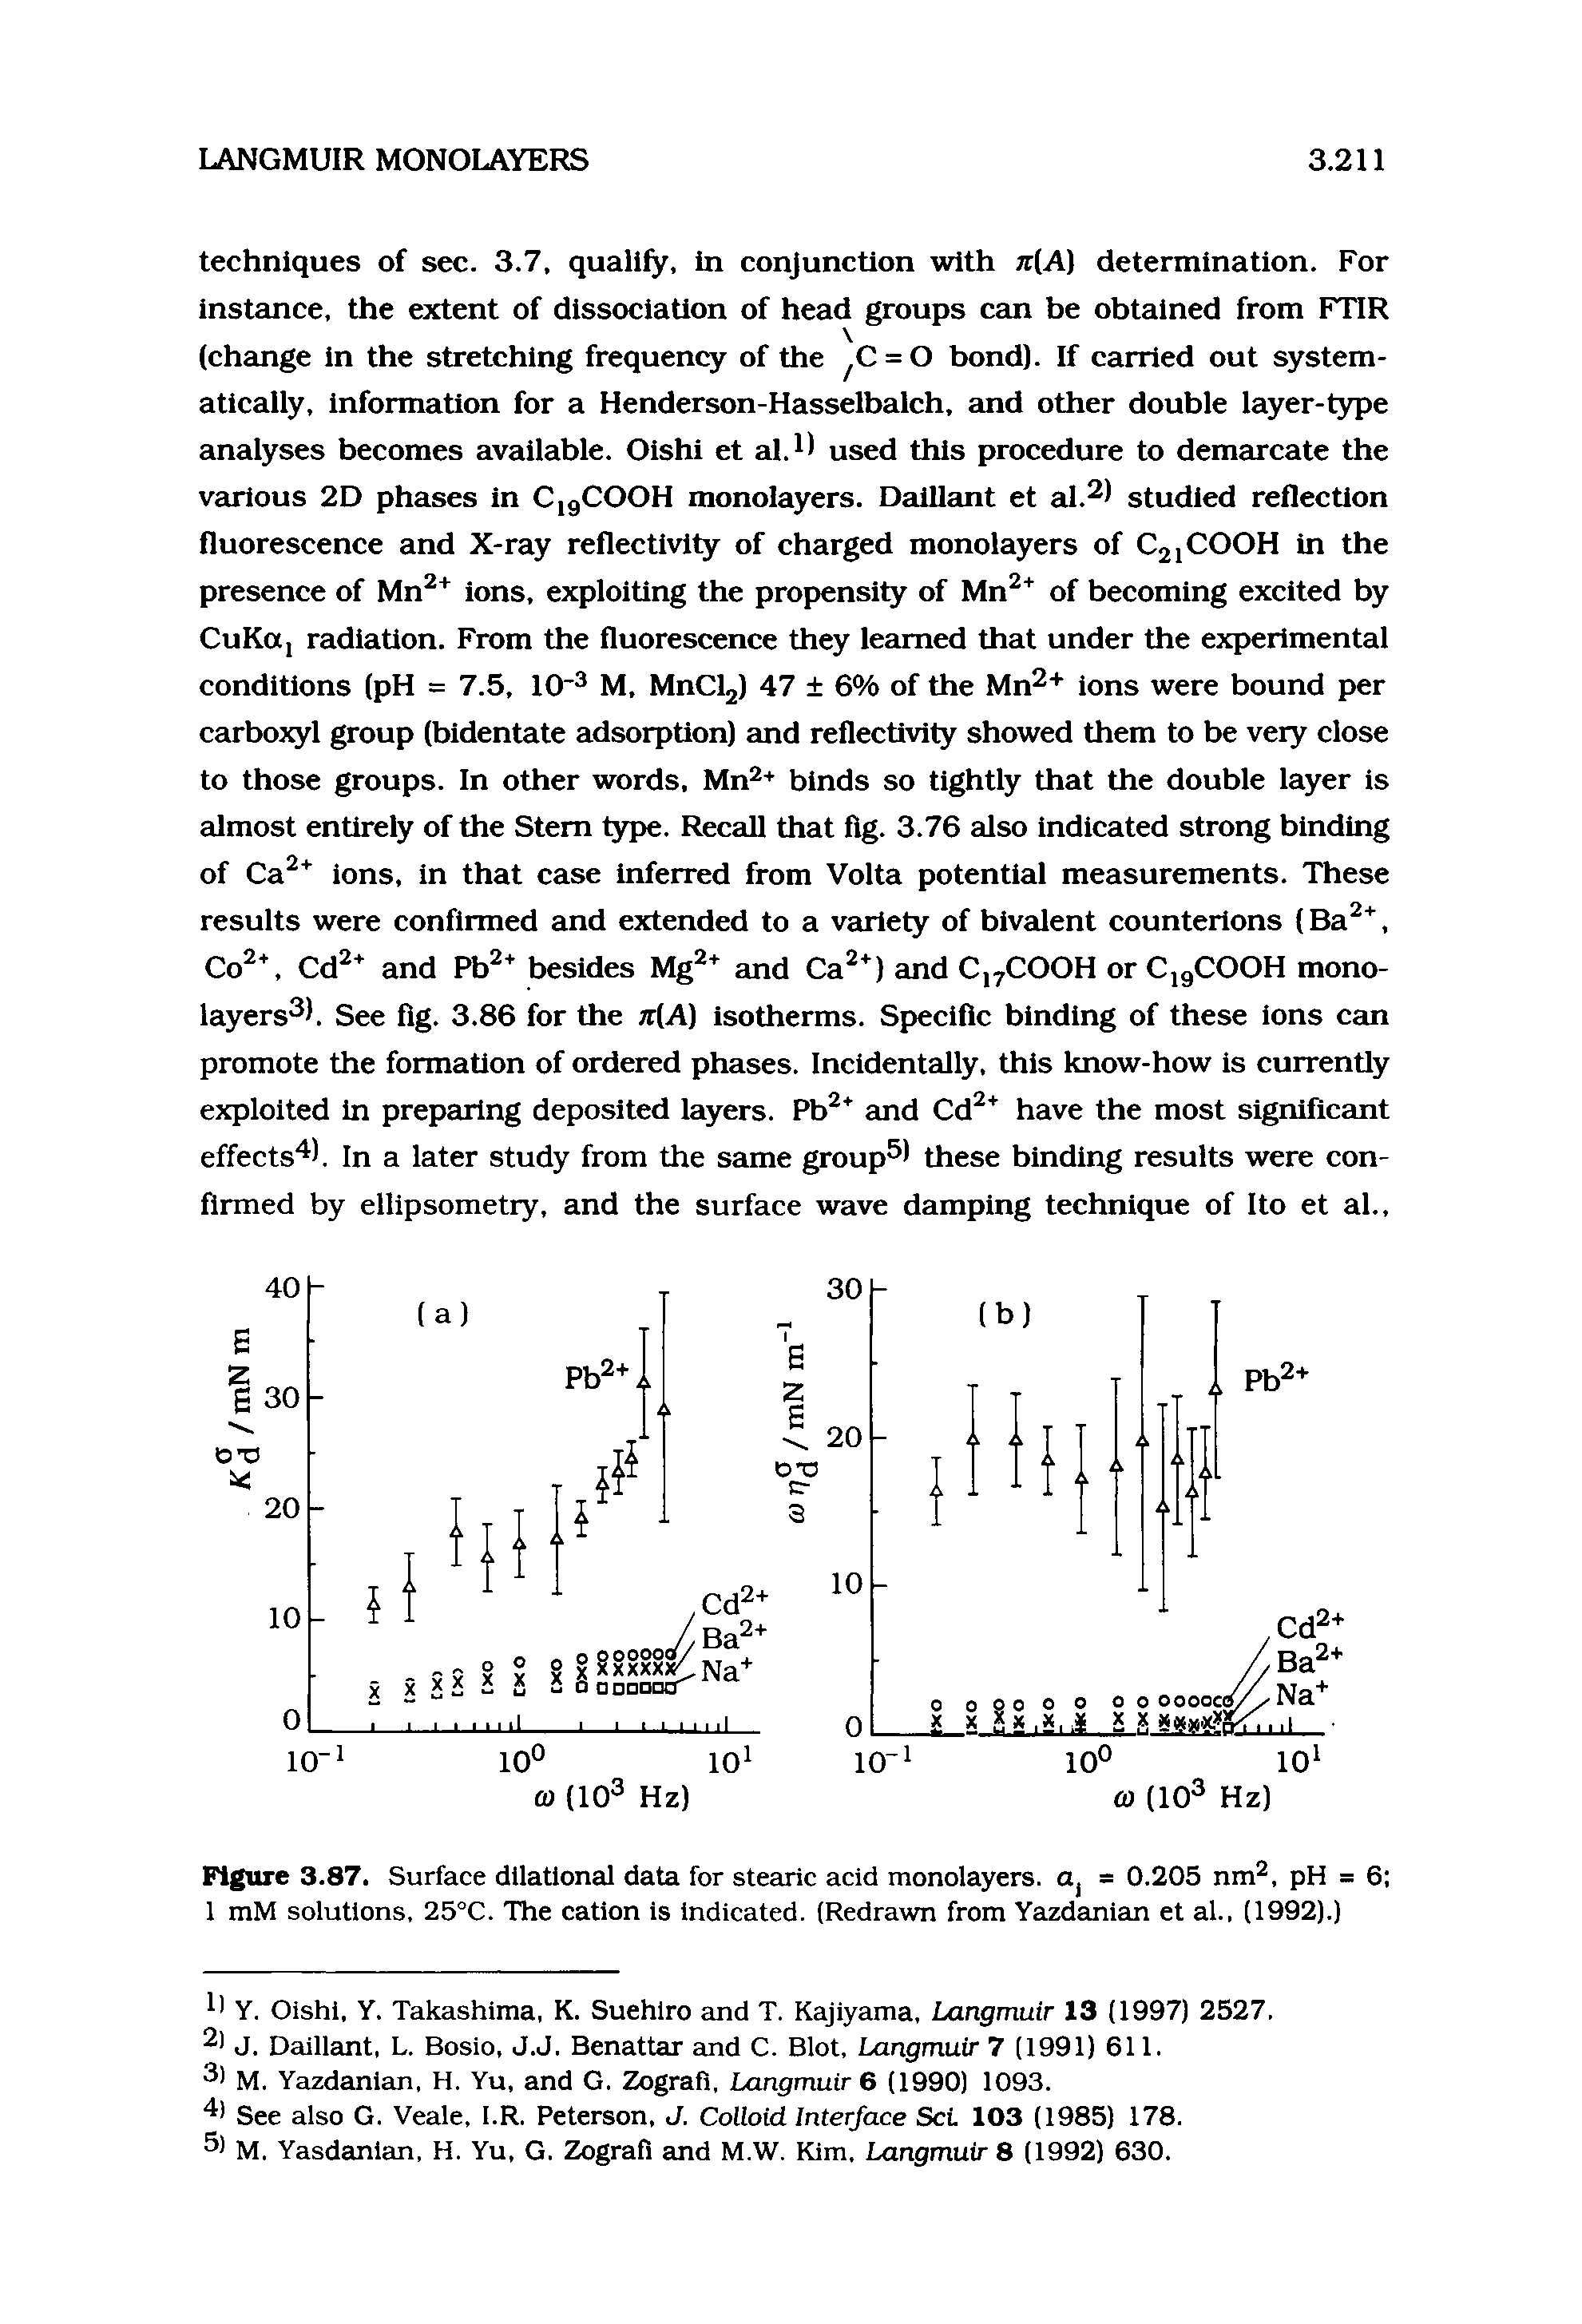 Figure 3.87. Surface dilational data for stearic acid monolayers. Oj = 0.205 nm, pH = 6 1 mM solutions, 25°C. The cation is indicated. (Redrawn from Yazdanian et al., (1992).)...